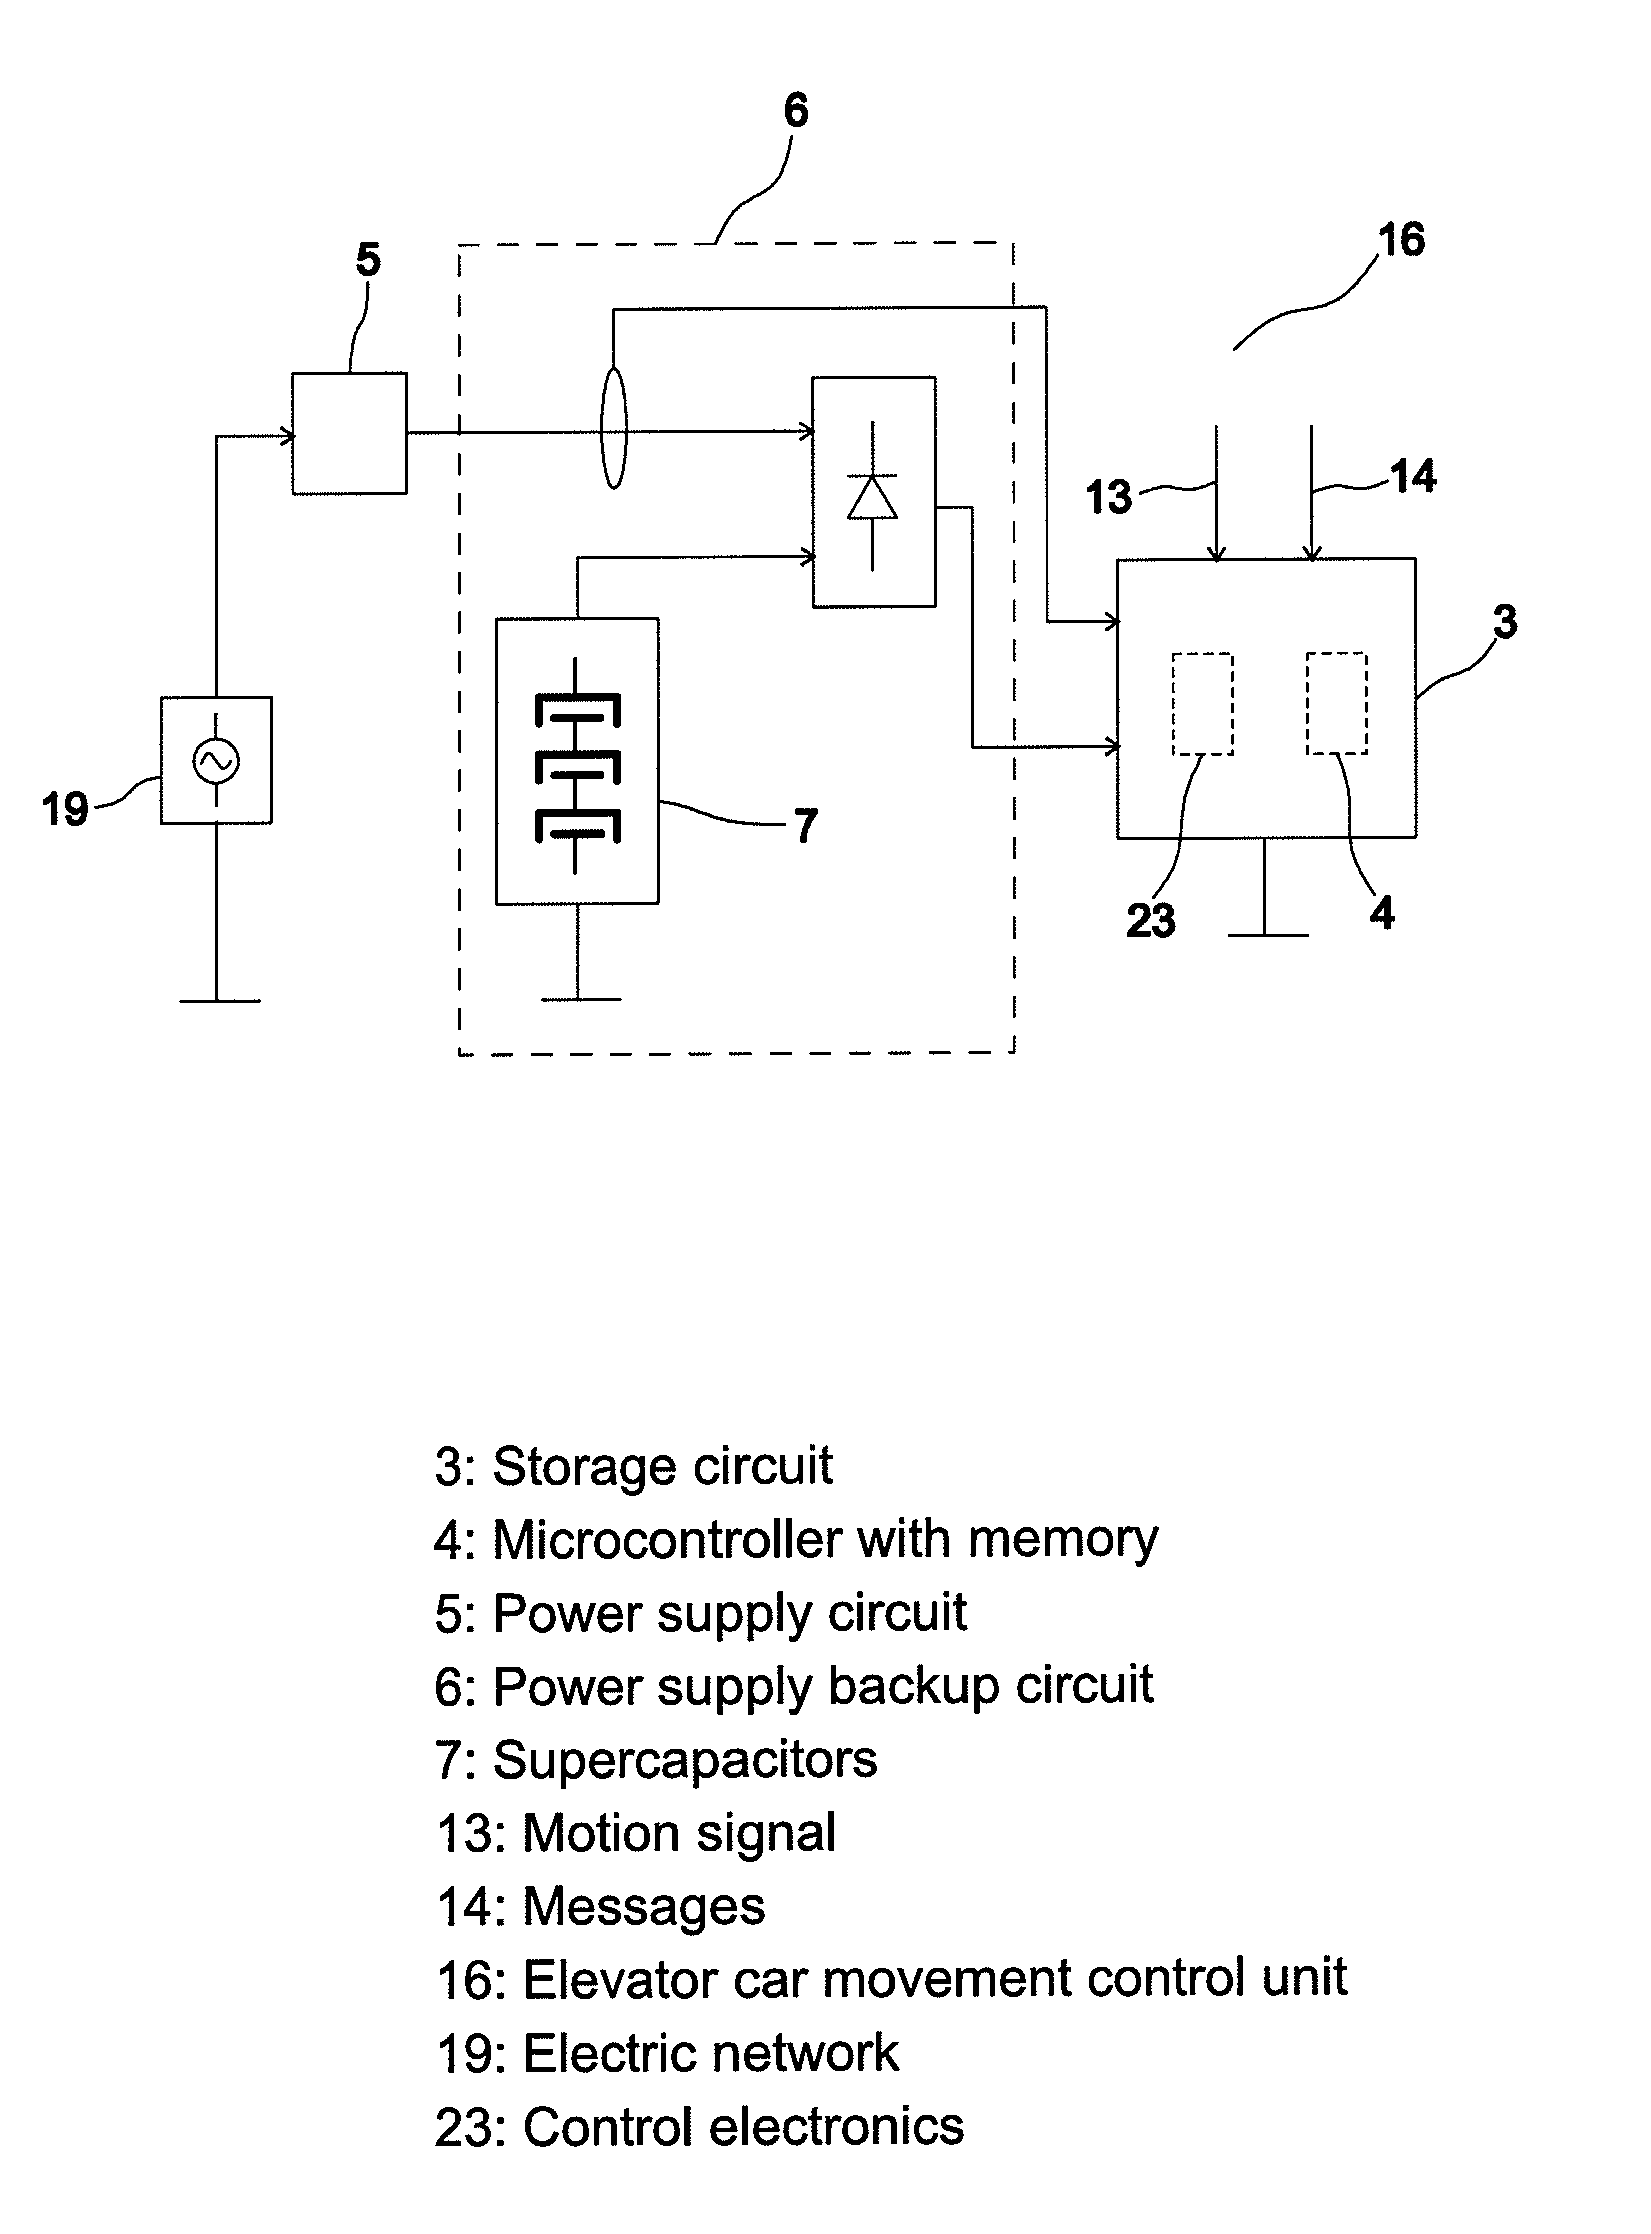 Transportation system with capacitive energy storage and non-volatile memory for storing the operational state of the transportation system upon detection of the operational anomaly in power